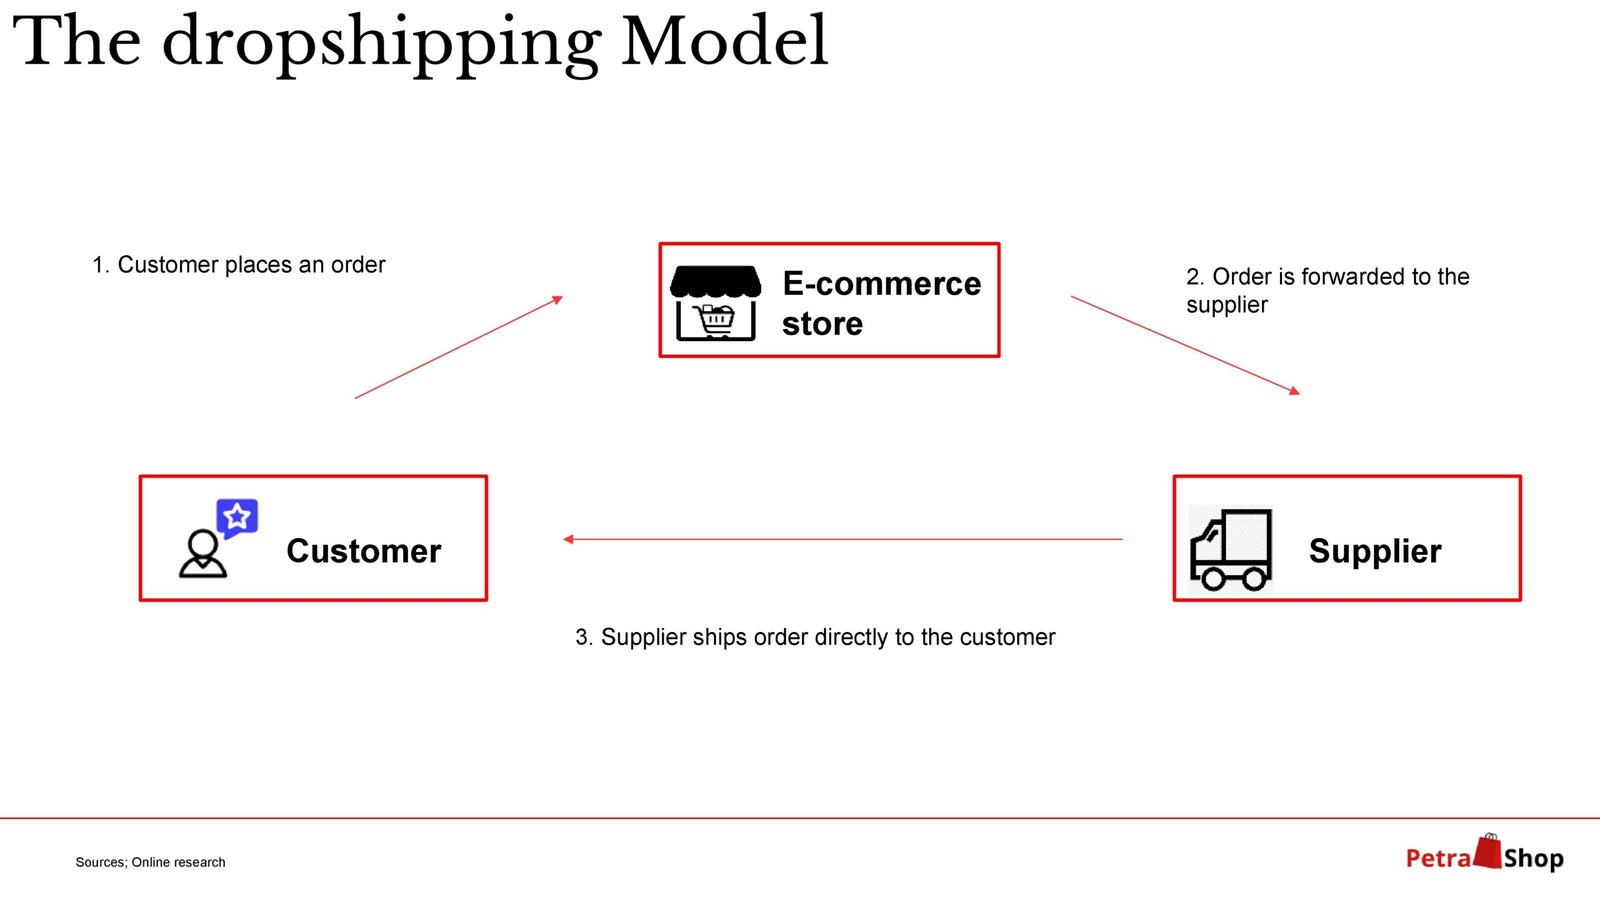 The Dropshipping model